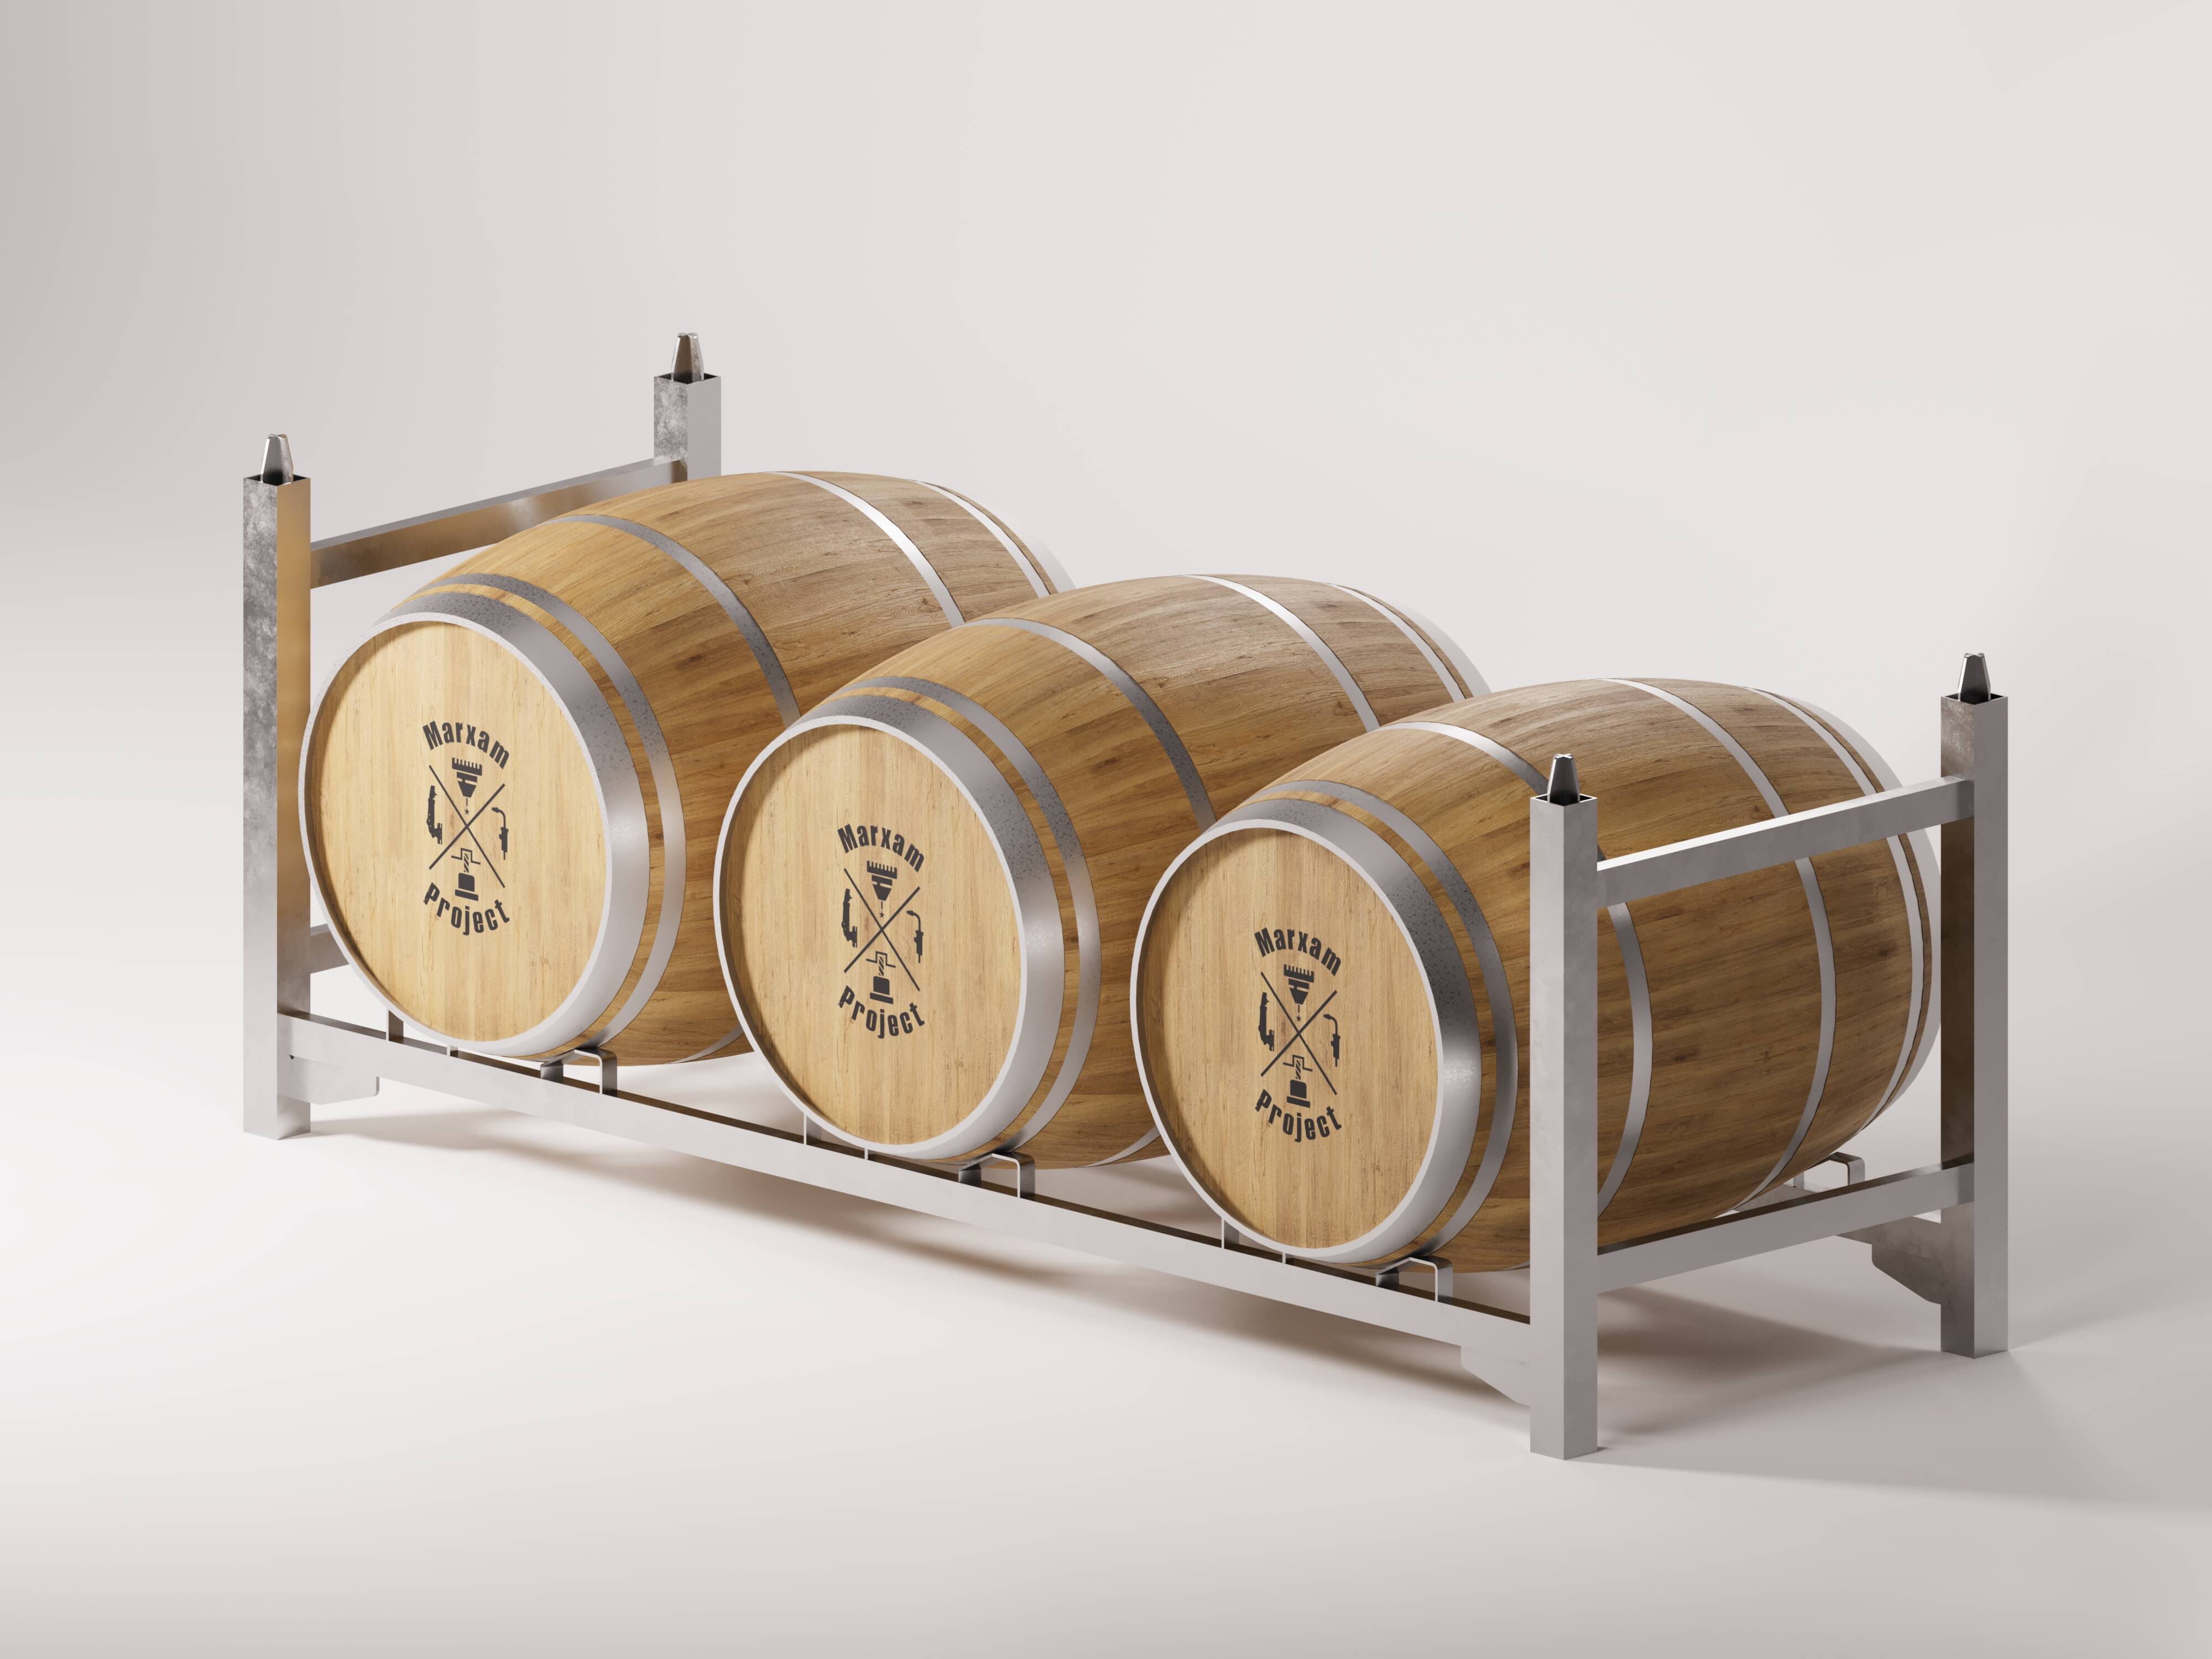 The image depicts a sturdy barrel cage holding three well-maintained wooden barrels.